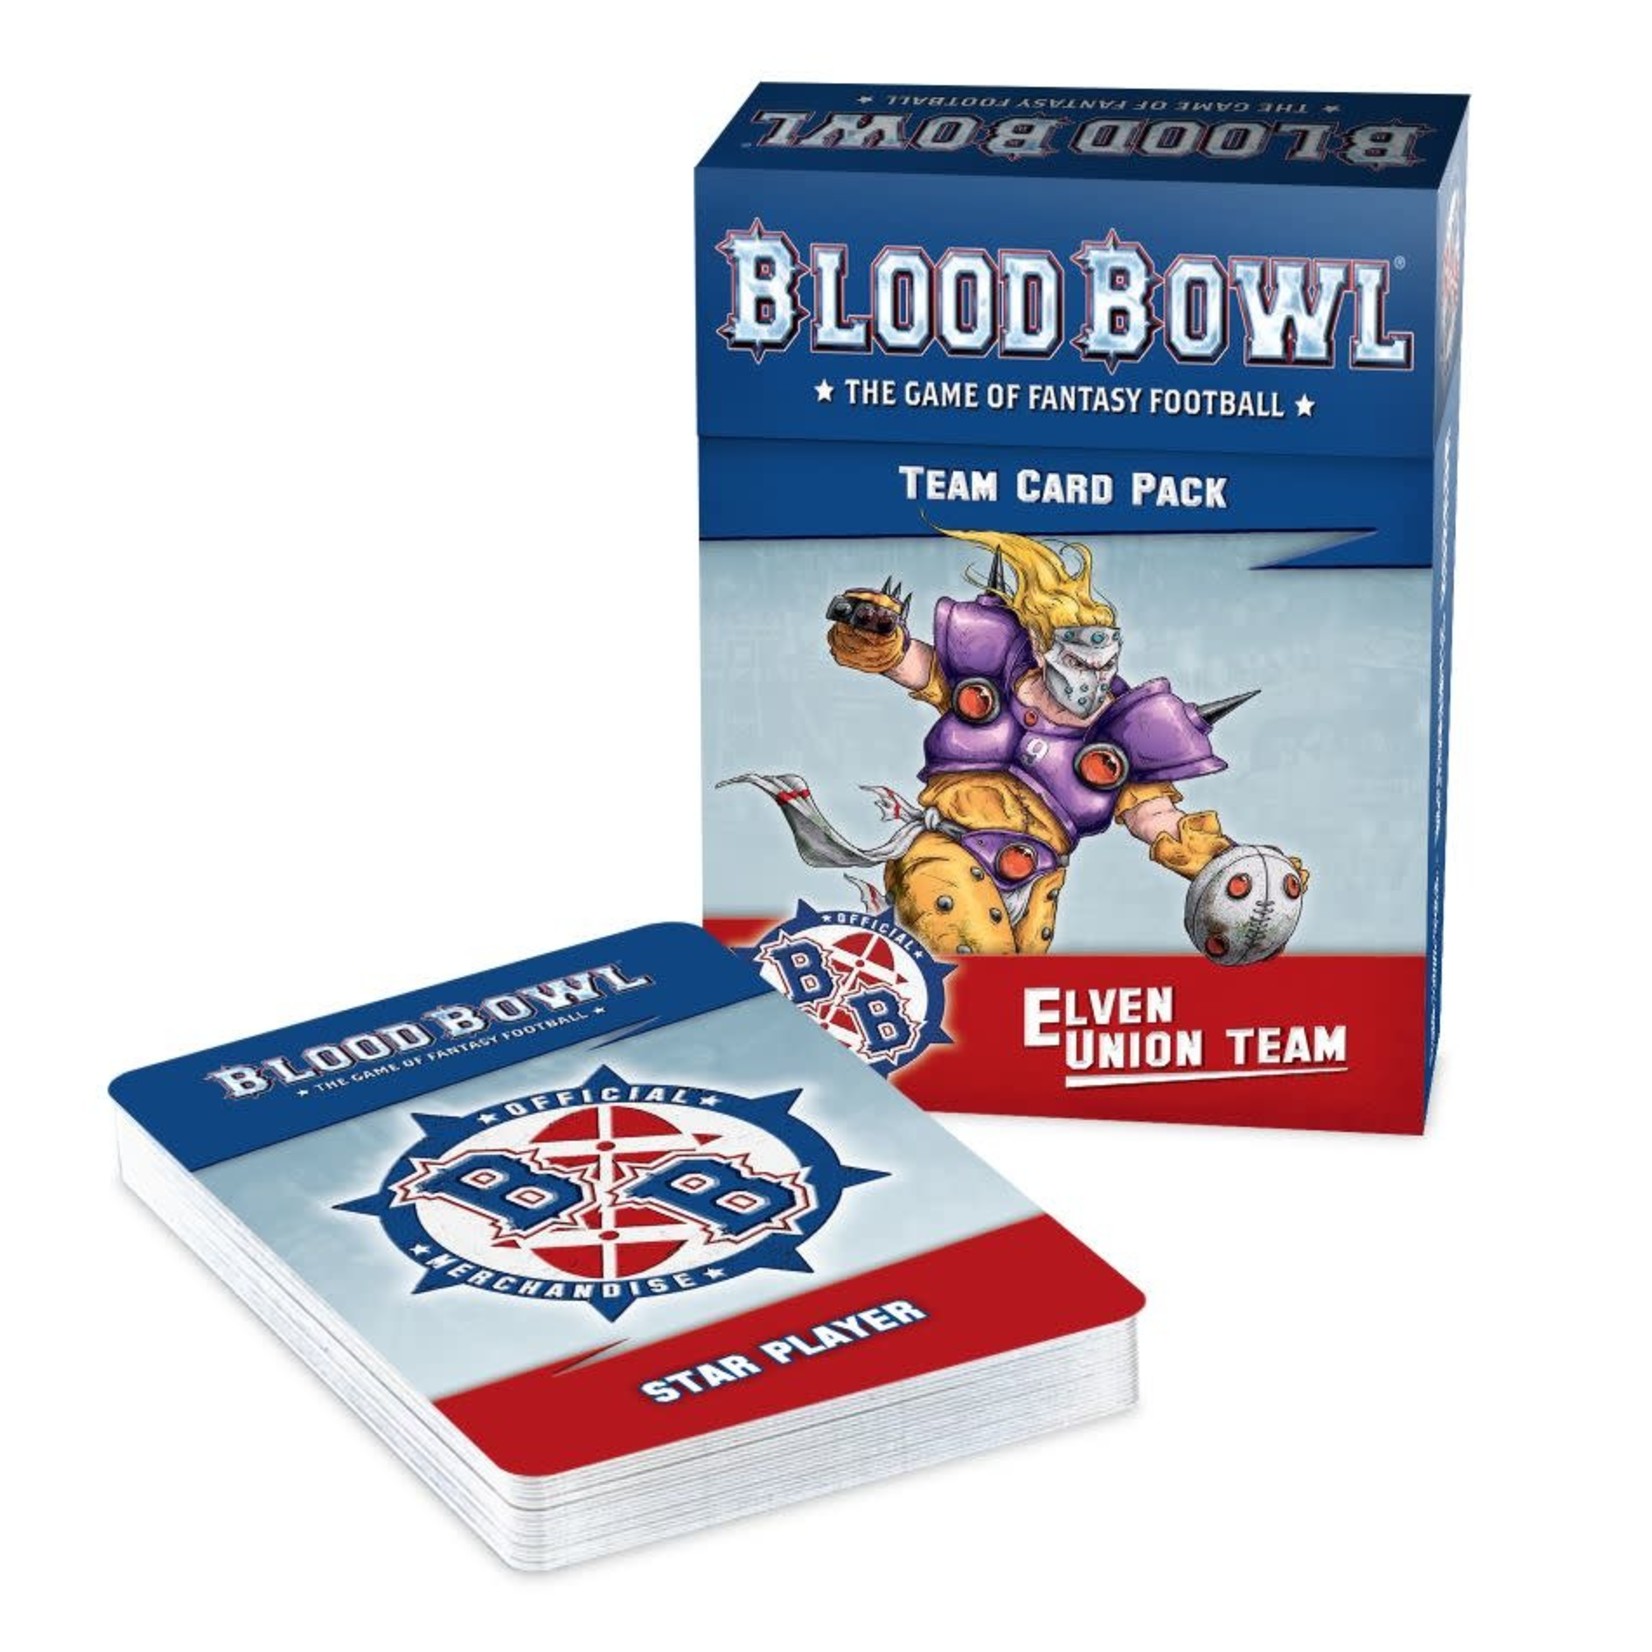 Bloodbowl Elven Union Team Card Pack